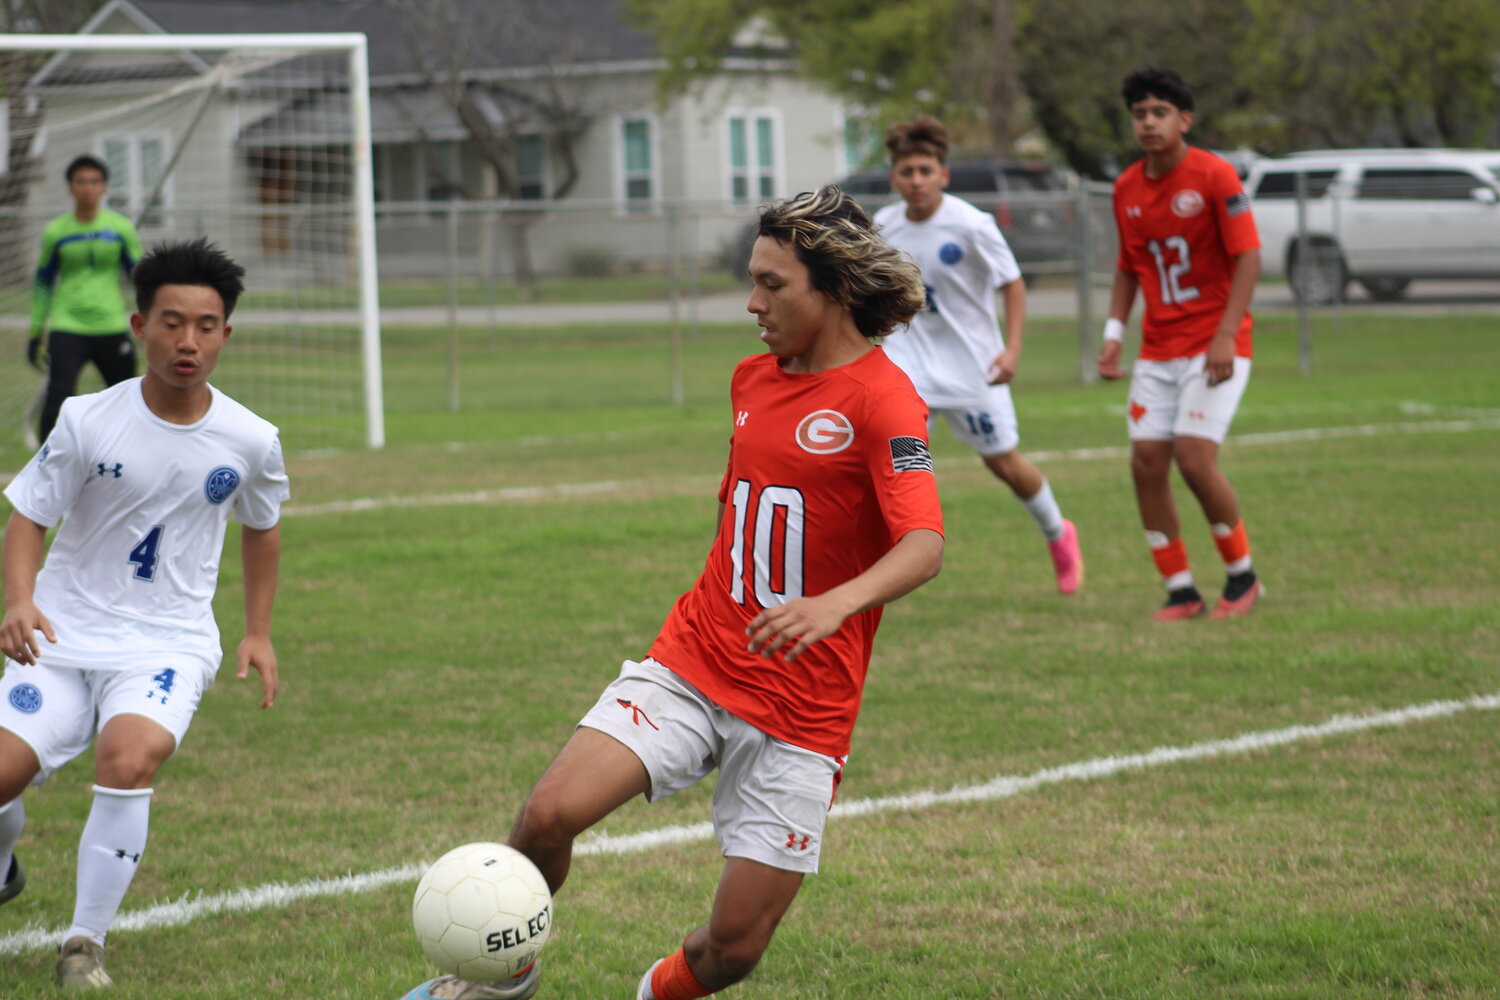 Senior Marcos Vazquez (10) kicks the soccer ball on the offense for the Apaches in the final match of the season against Memorial Tuesday, March 12.